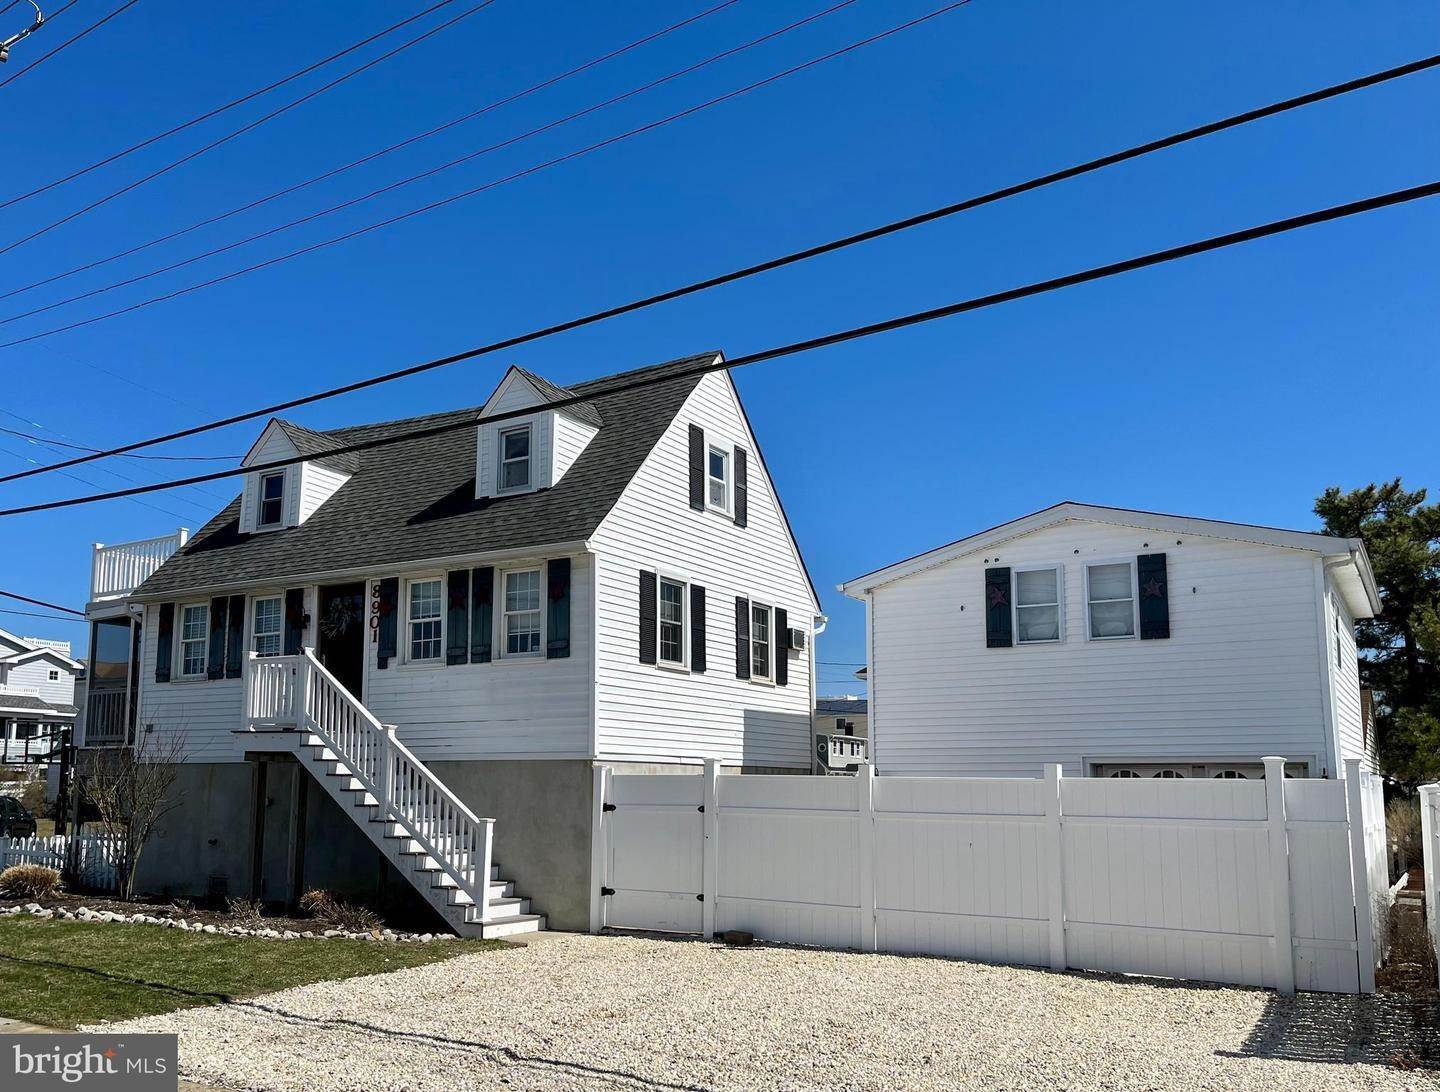 Duplex Homes for Sale at Long Beach Township, New Jersey 08008 United States